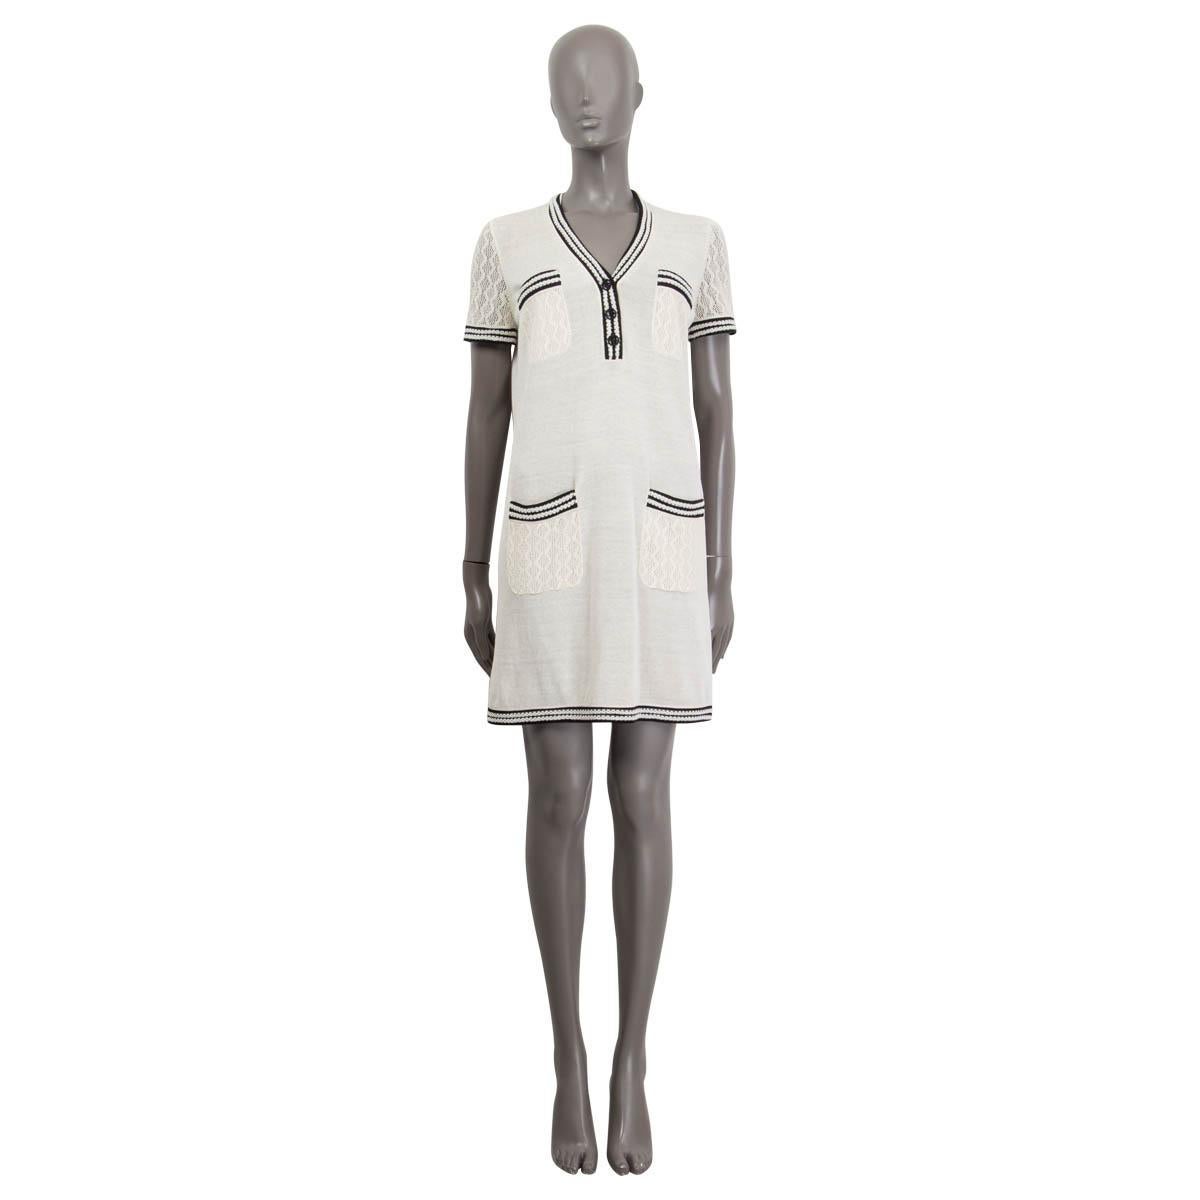 100% authentic Chanel Pre-Spring 2019 short sleeve knit dress in beige silk (87%) and polyester (13%). Features a deep v-neck and a crochet trim in black and off-white. Has four patch pockets at the front. Opens with three black 'CC' buttons at the